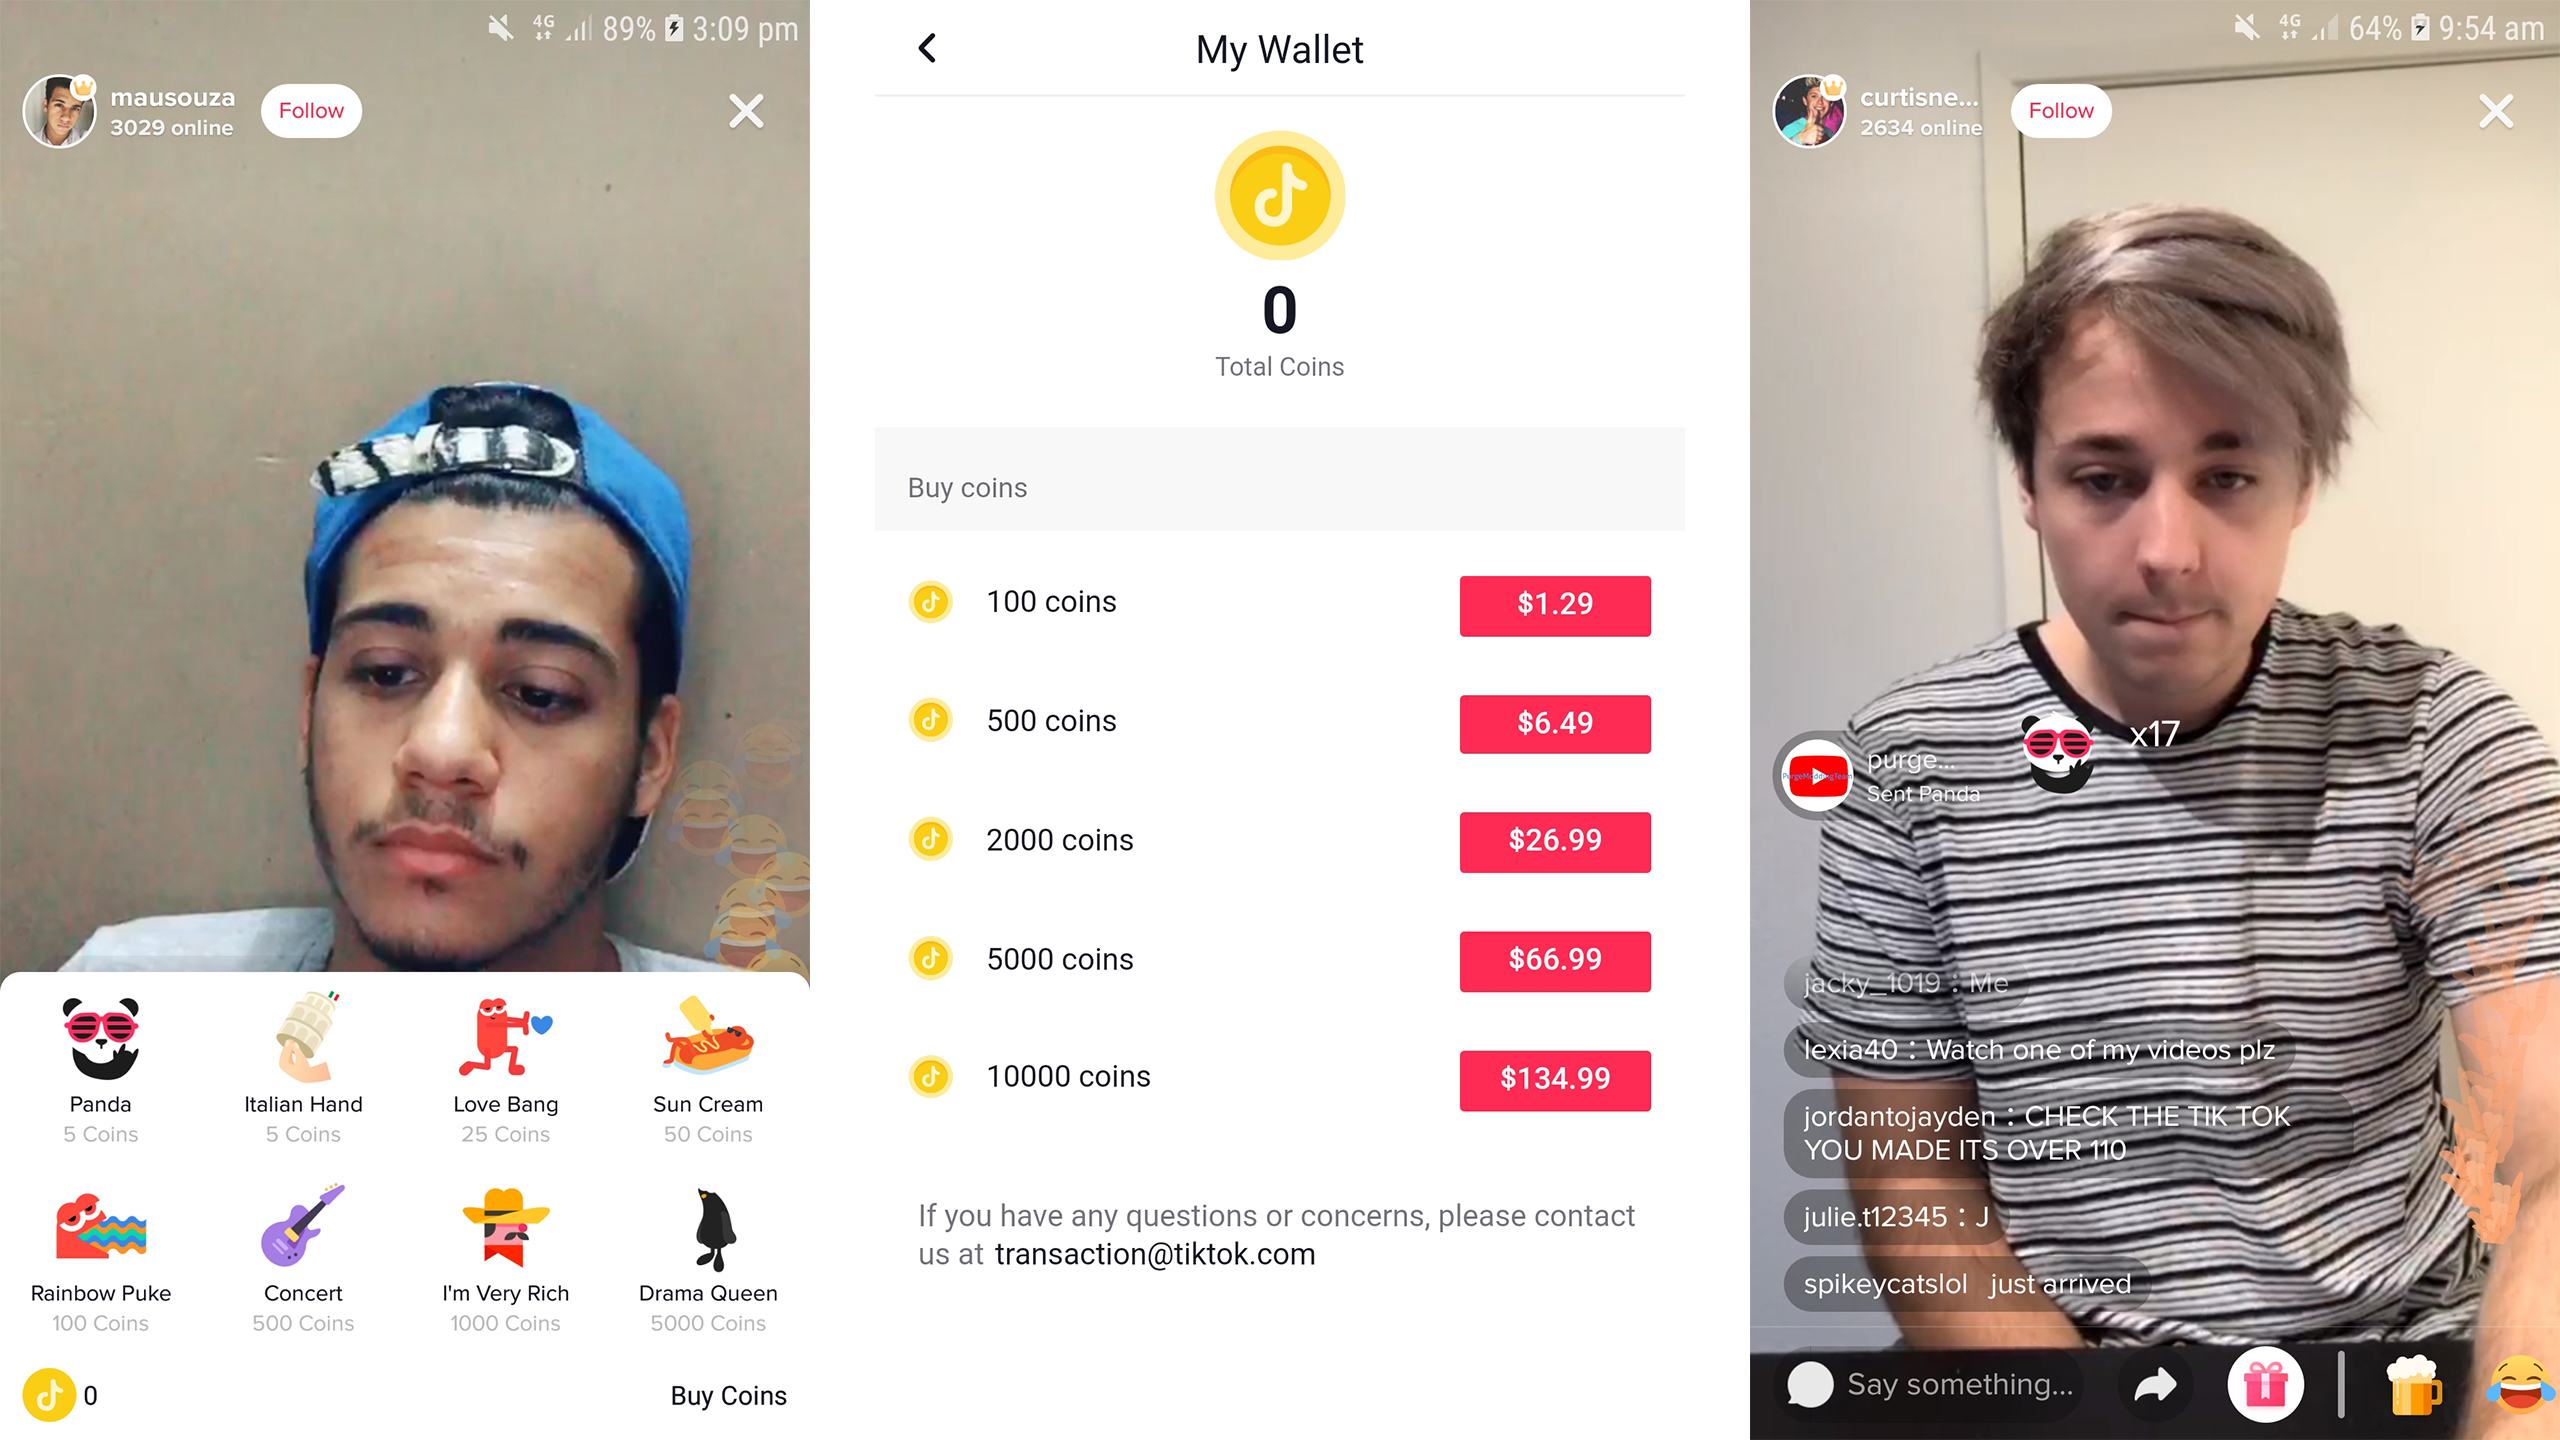 Three screenshots from the app TikTok show users can purchase "gifts" and send them to each other.